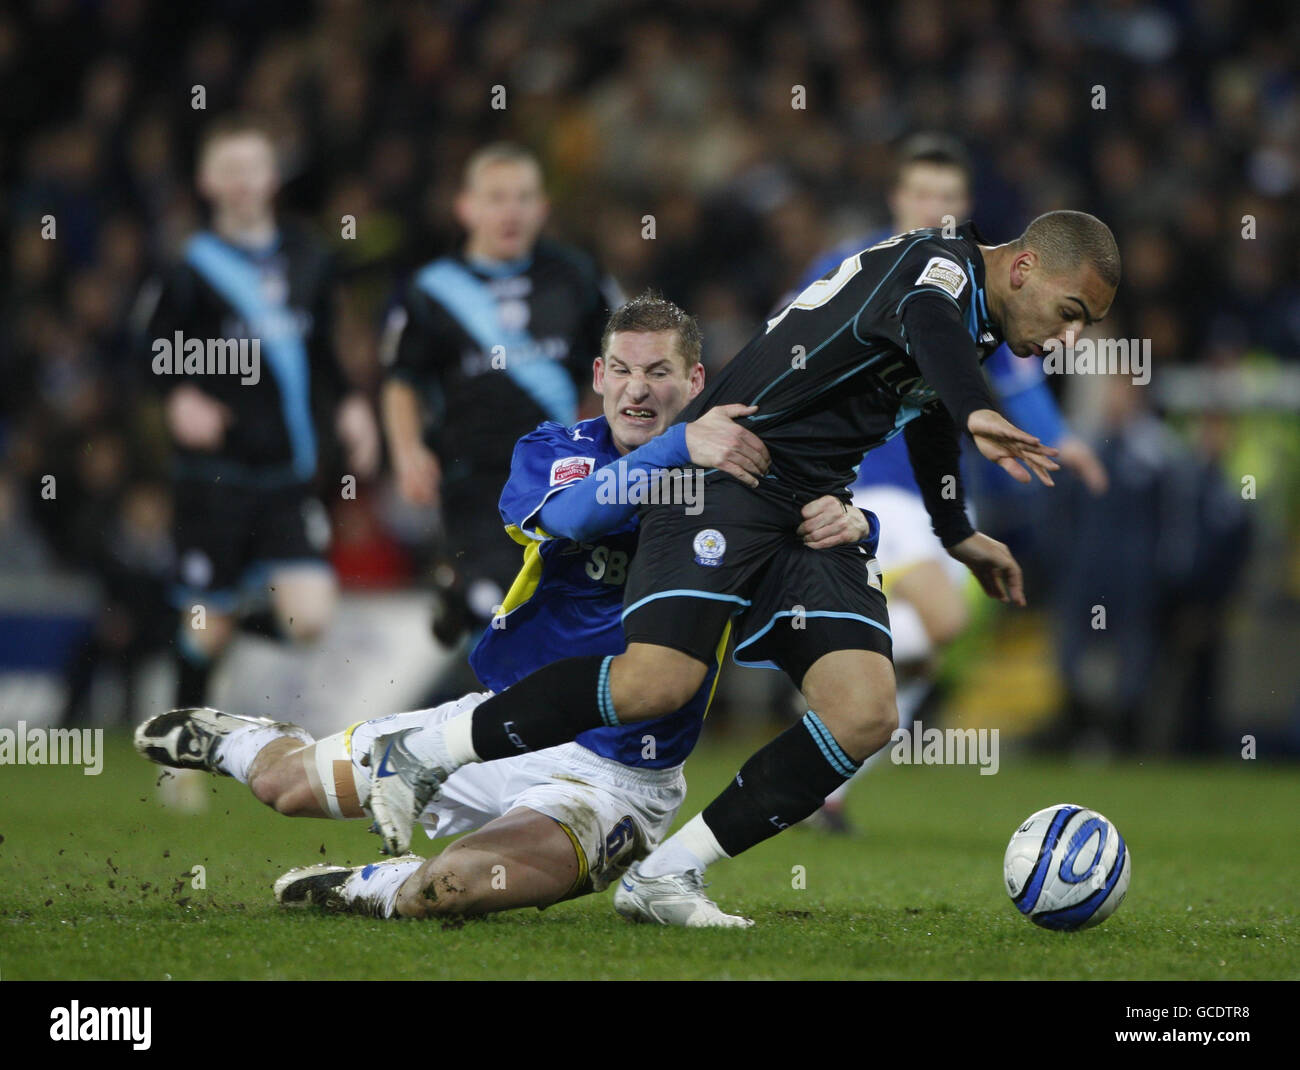 Leicester City's James Vaughan is pulled down by Cardiff City defender Gabor Gyepes and leading to him being red carded during the Coca-Cola Championship match at Cardiff City Stadium, Cardiff. Stock Photo